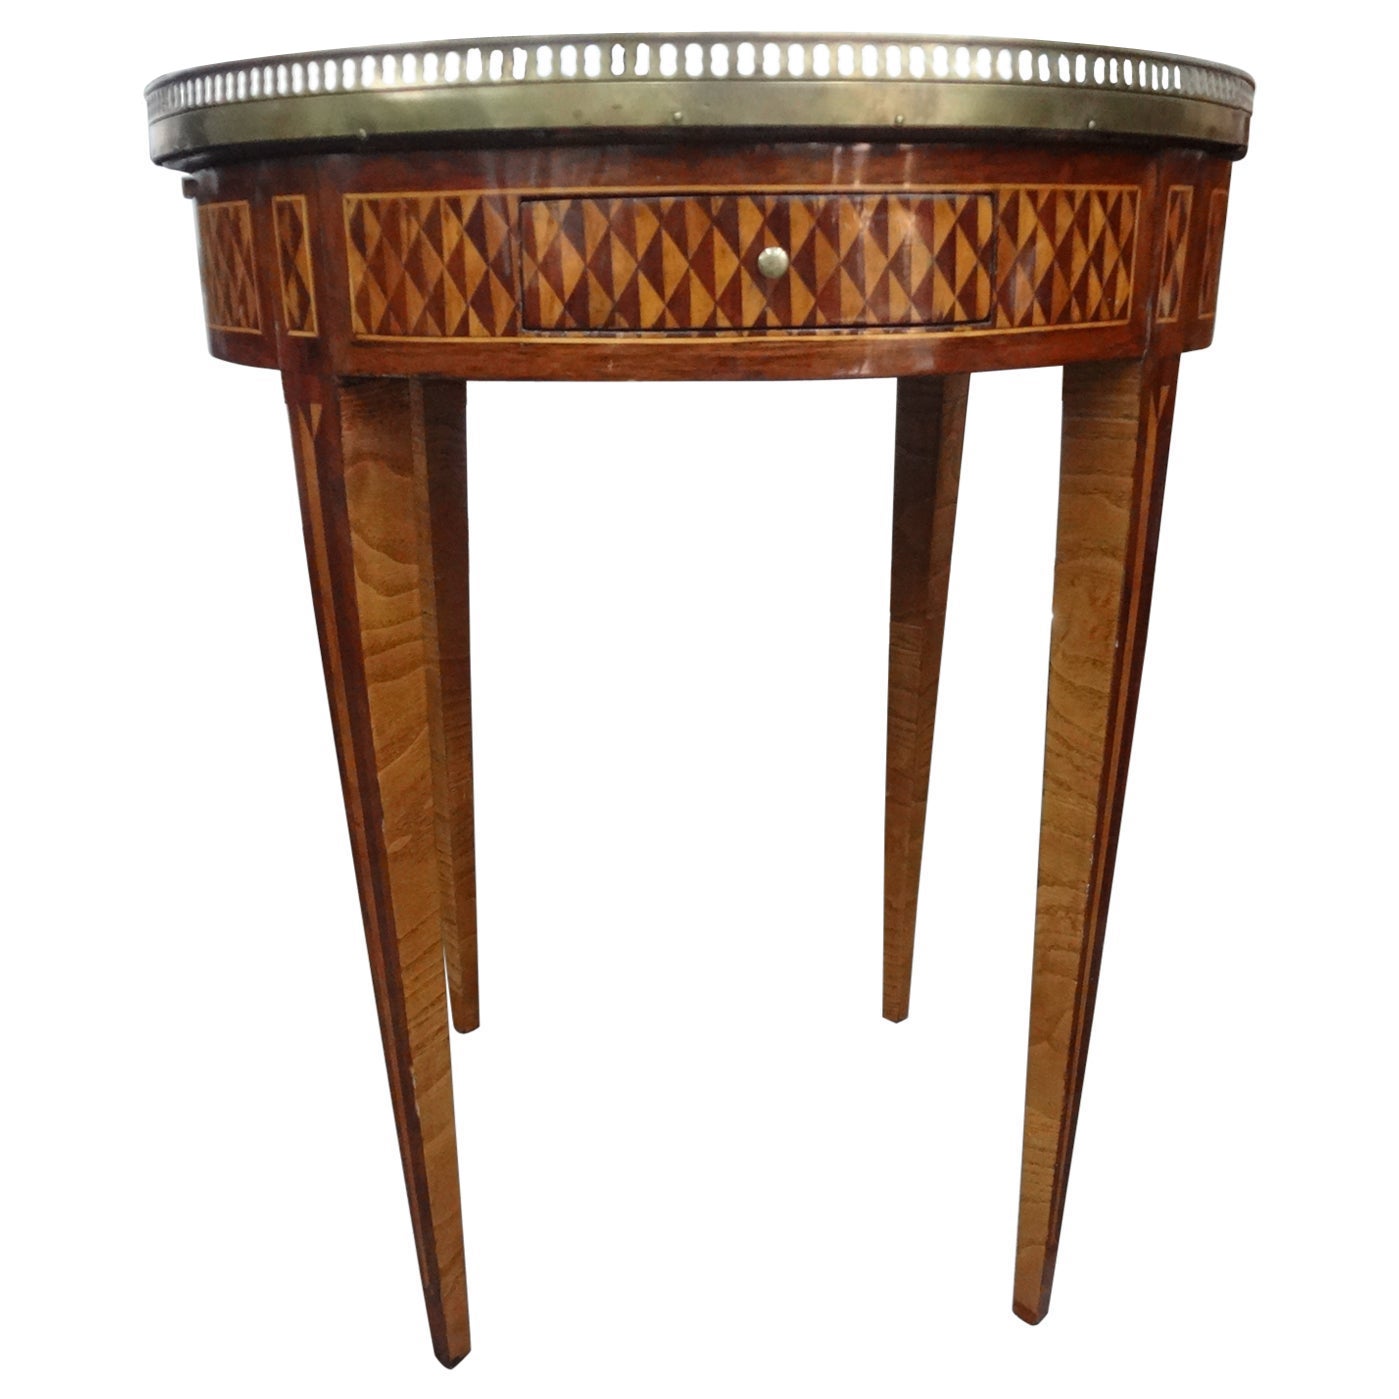 Marquetry Tables